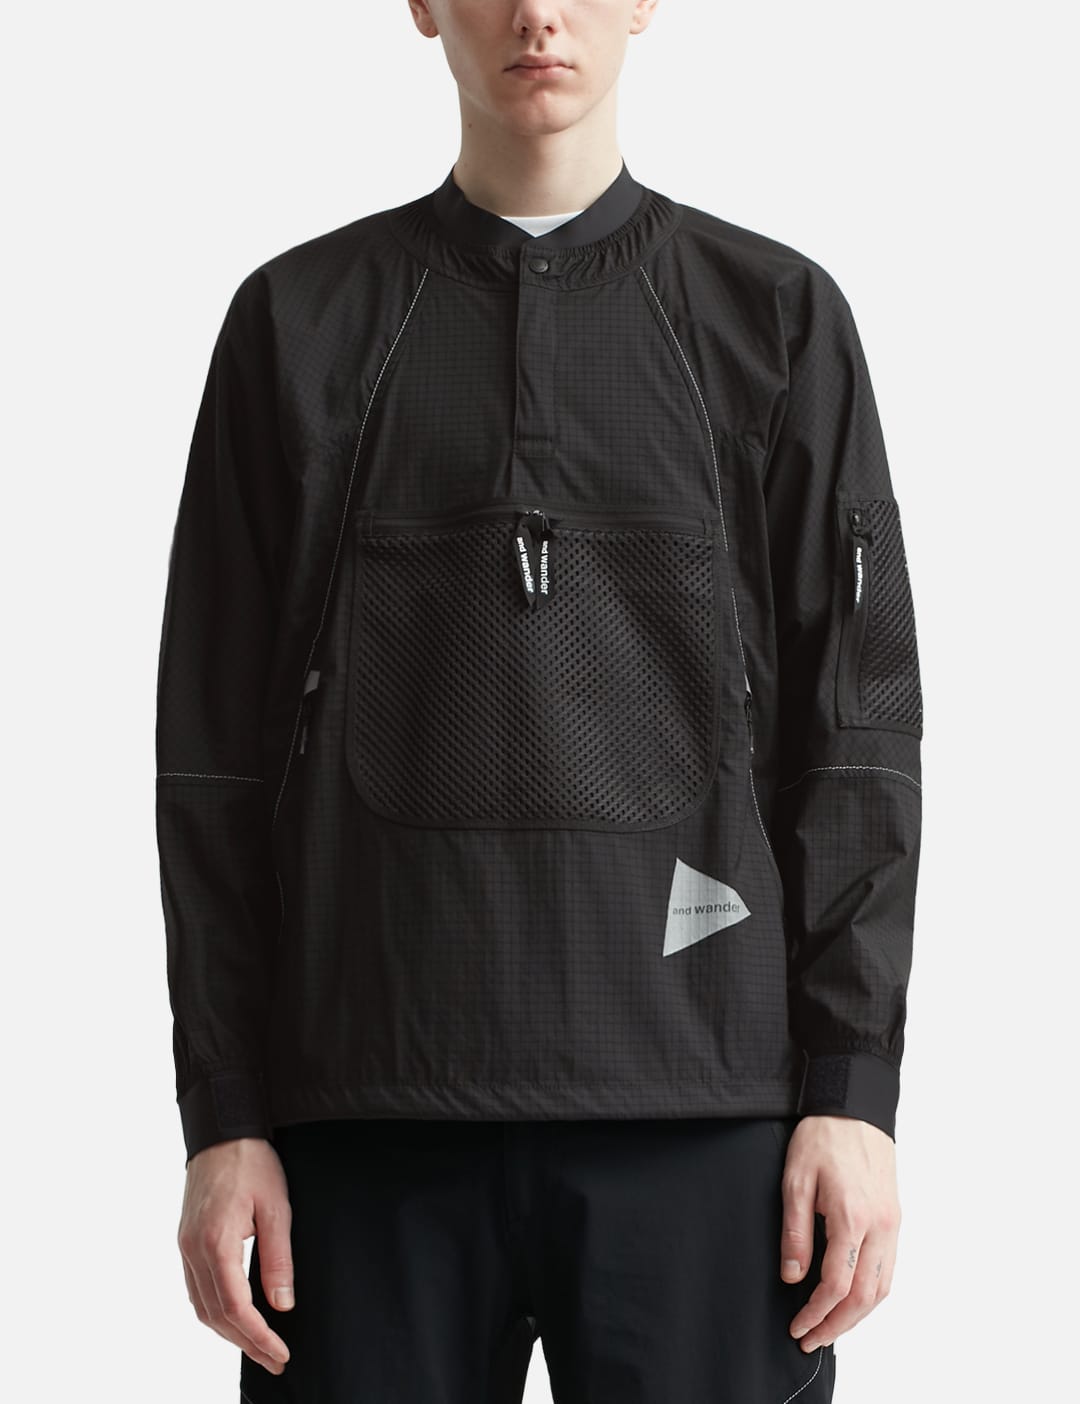 and wander - breath rip pullover jacket | HBX - Globally Curated 